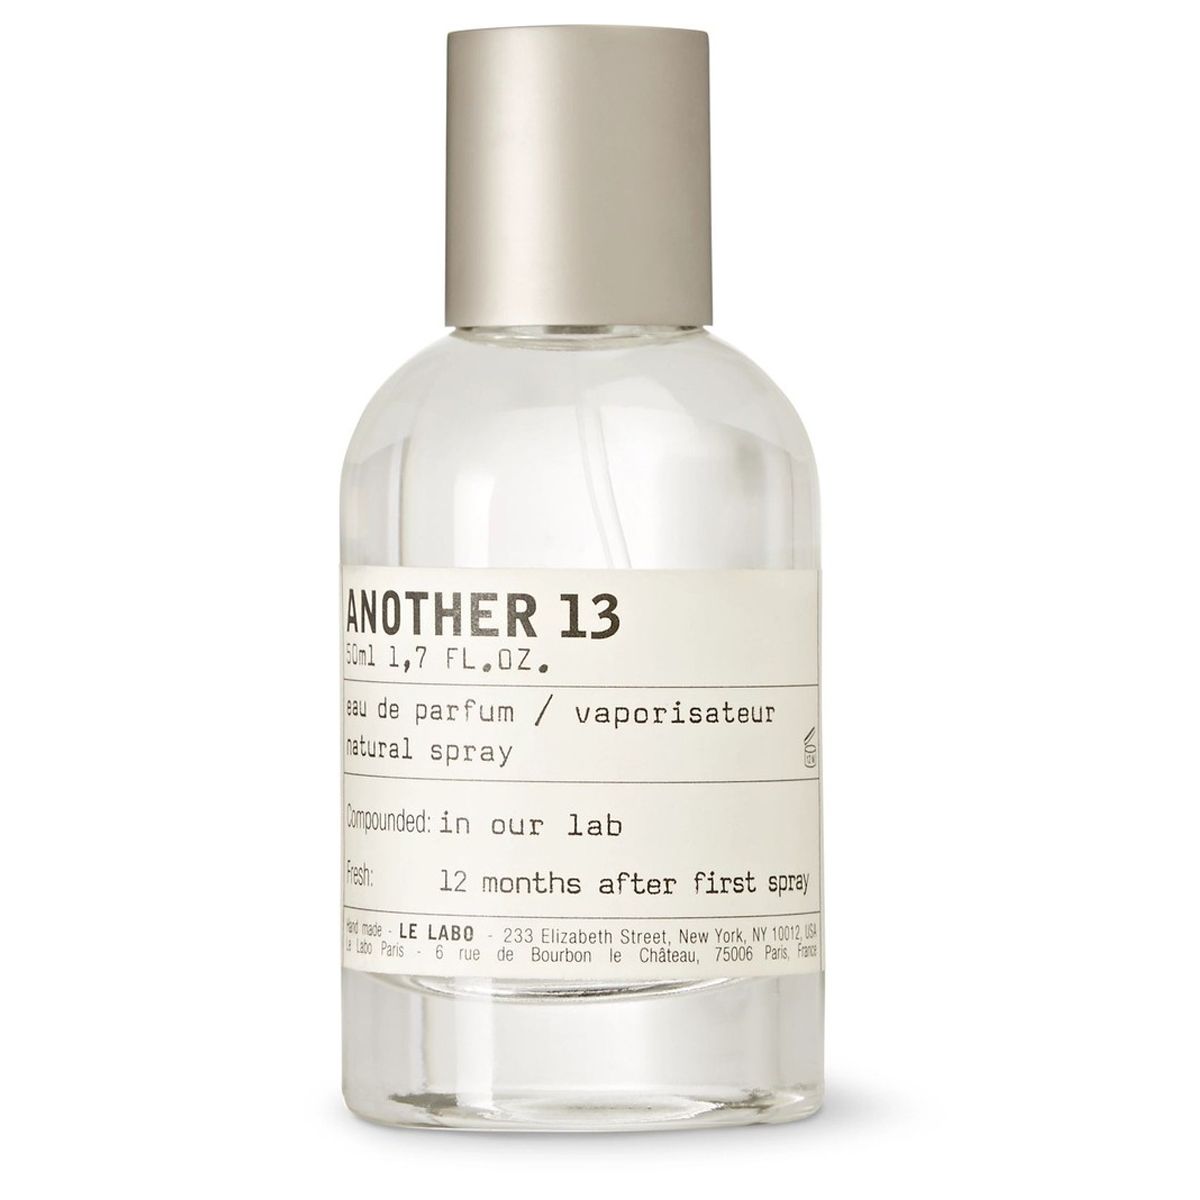  Le Labo Another 13 